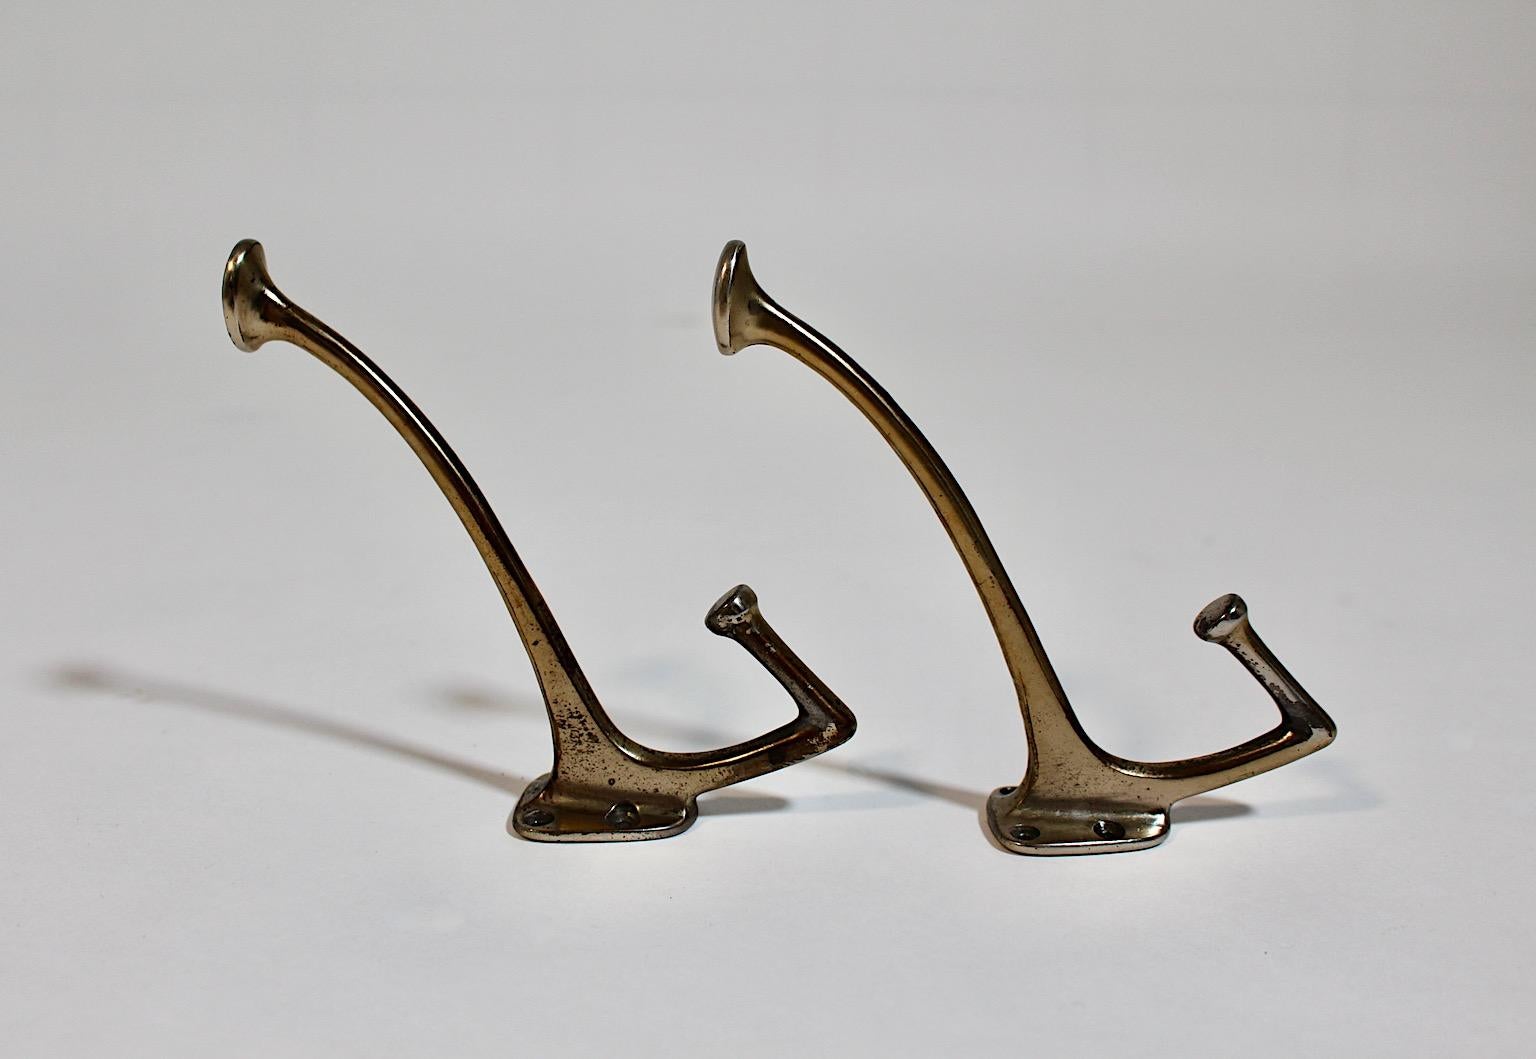 Jugendstil vintage duo or pair of coat hooks wall hooks nickel plated designed by Adolf Loos circa 1916 Vienna.
A stunning pair of vintage wall coat hooks from nickel plated metal designed by Adolf Loos for Cafe Capua circa 1916.
These hooks are